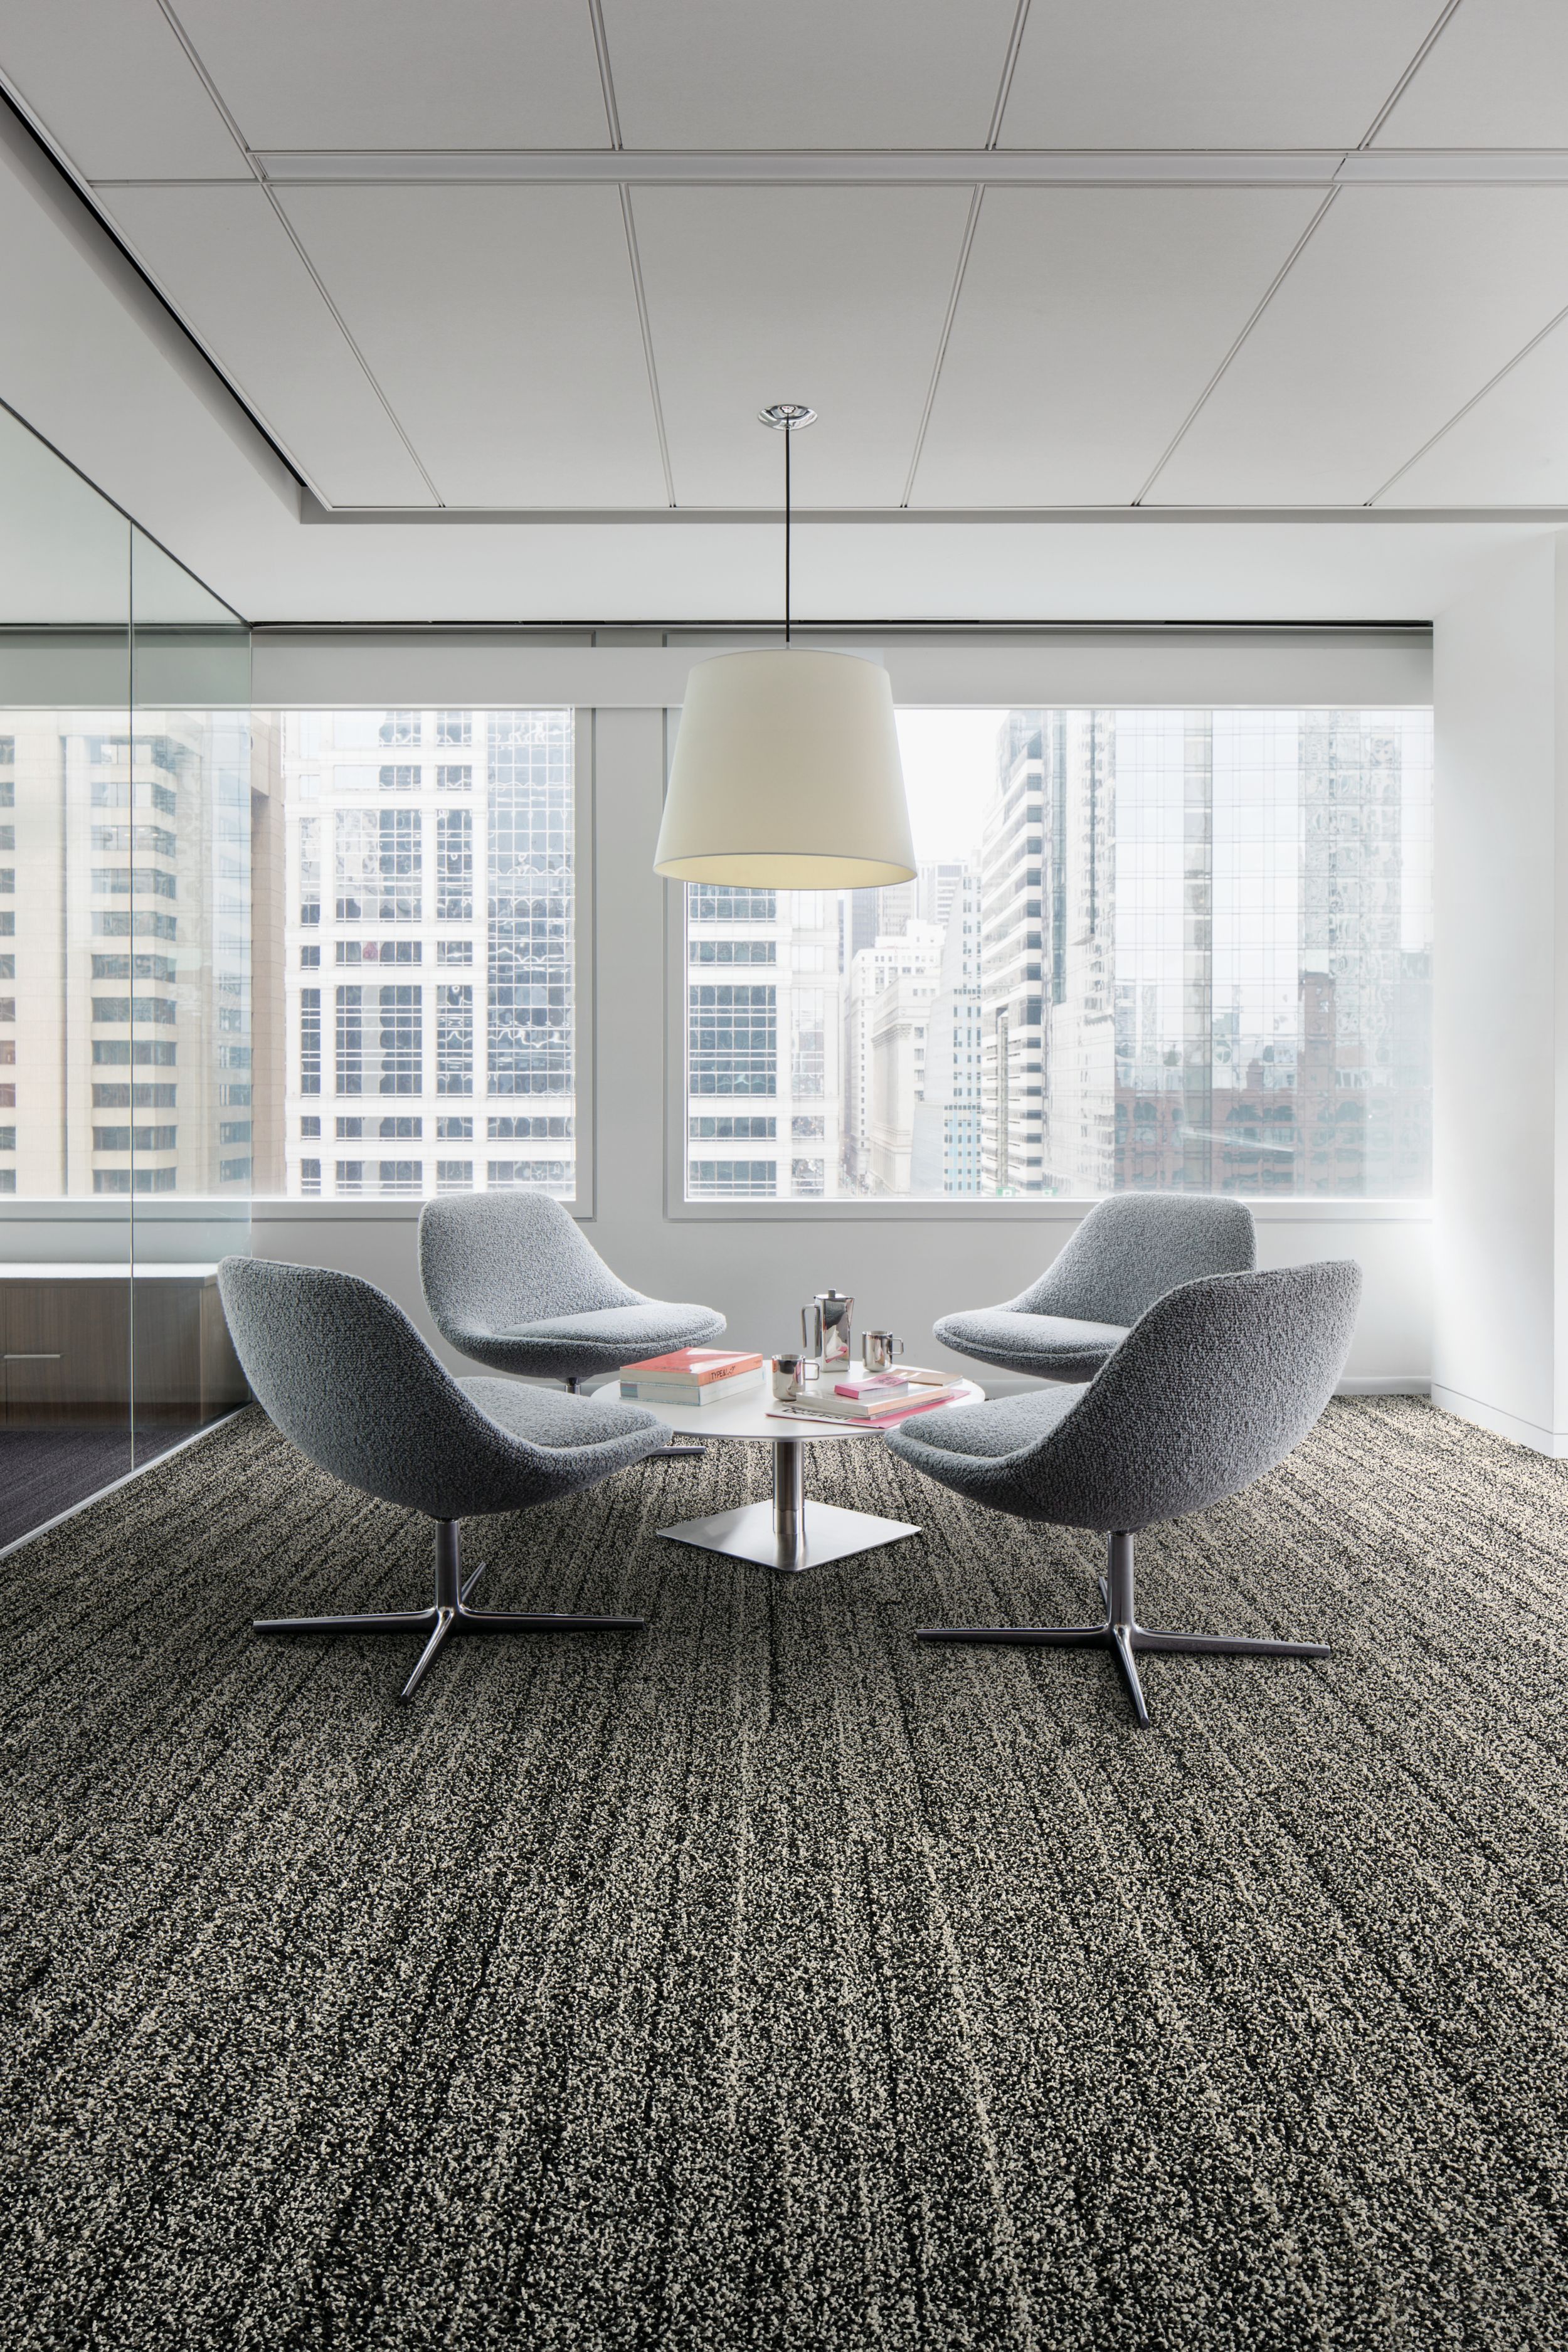 Interface Overedge plank carpet tile with fabric chairs around round table numéro d’image 2